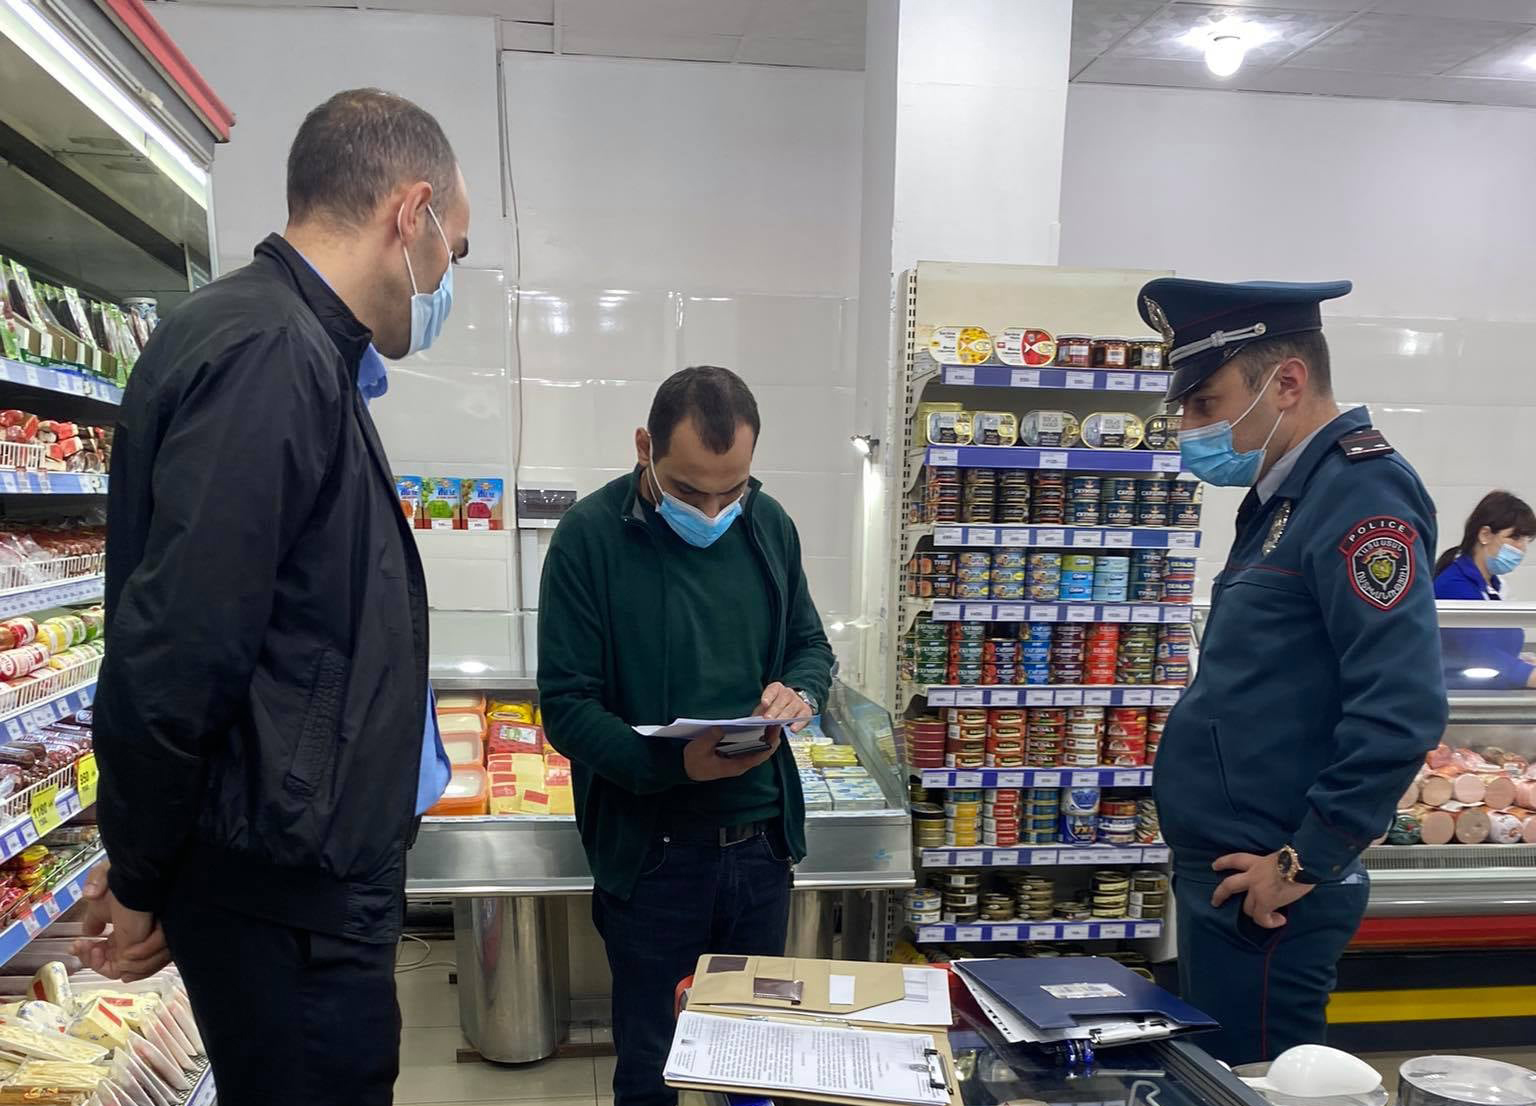 On Monday evening, FSIB inspectors inspected the sales network and catering facilities of Shengavit administrative district of Yerevan